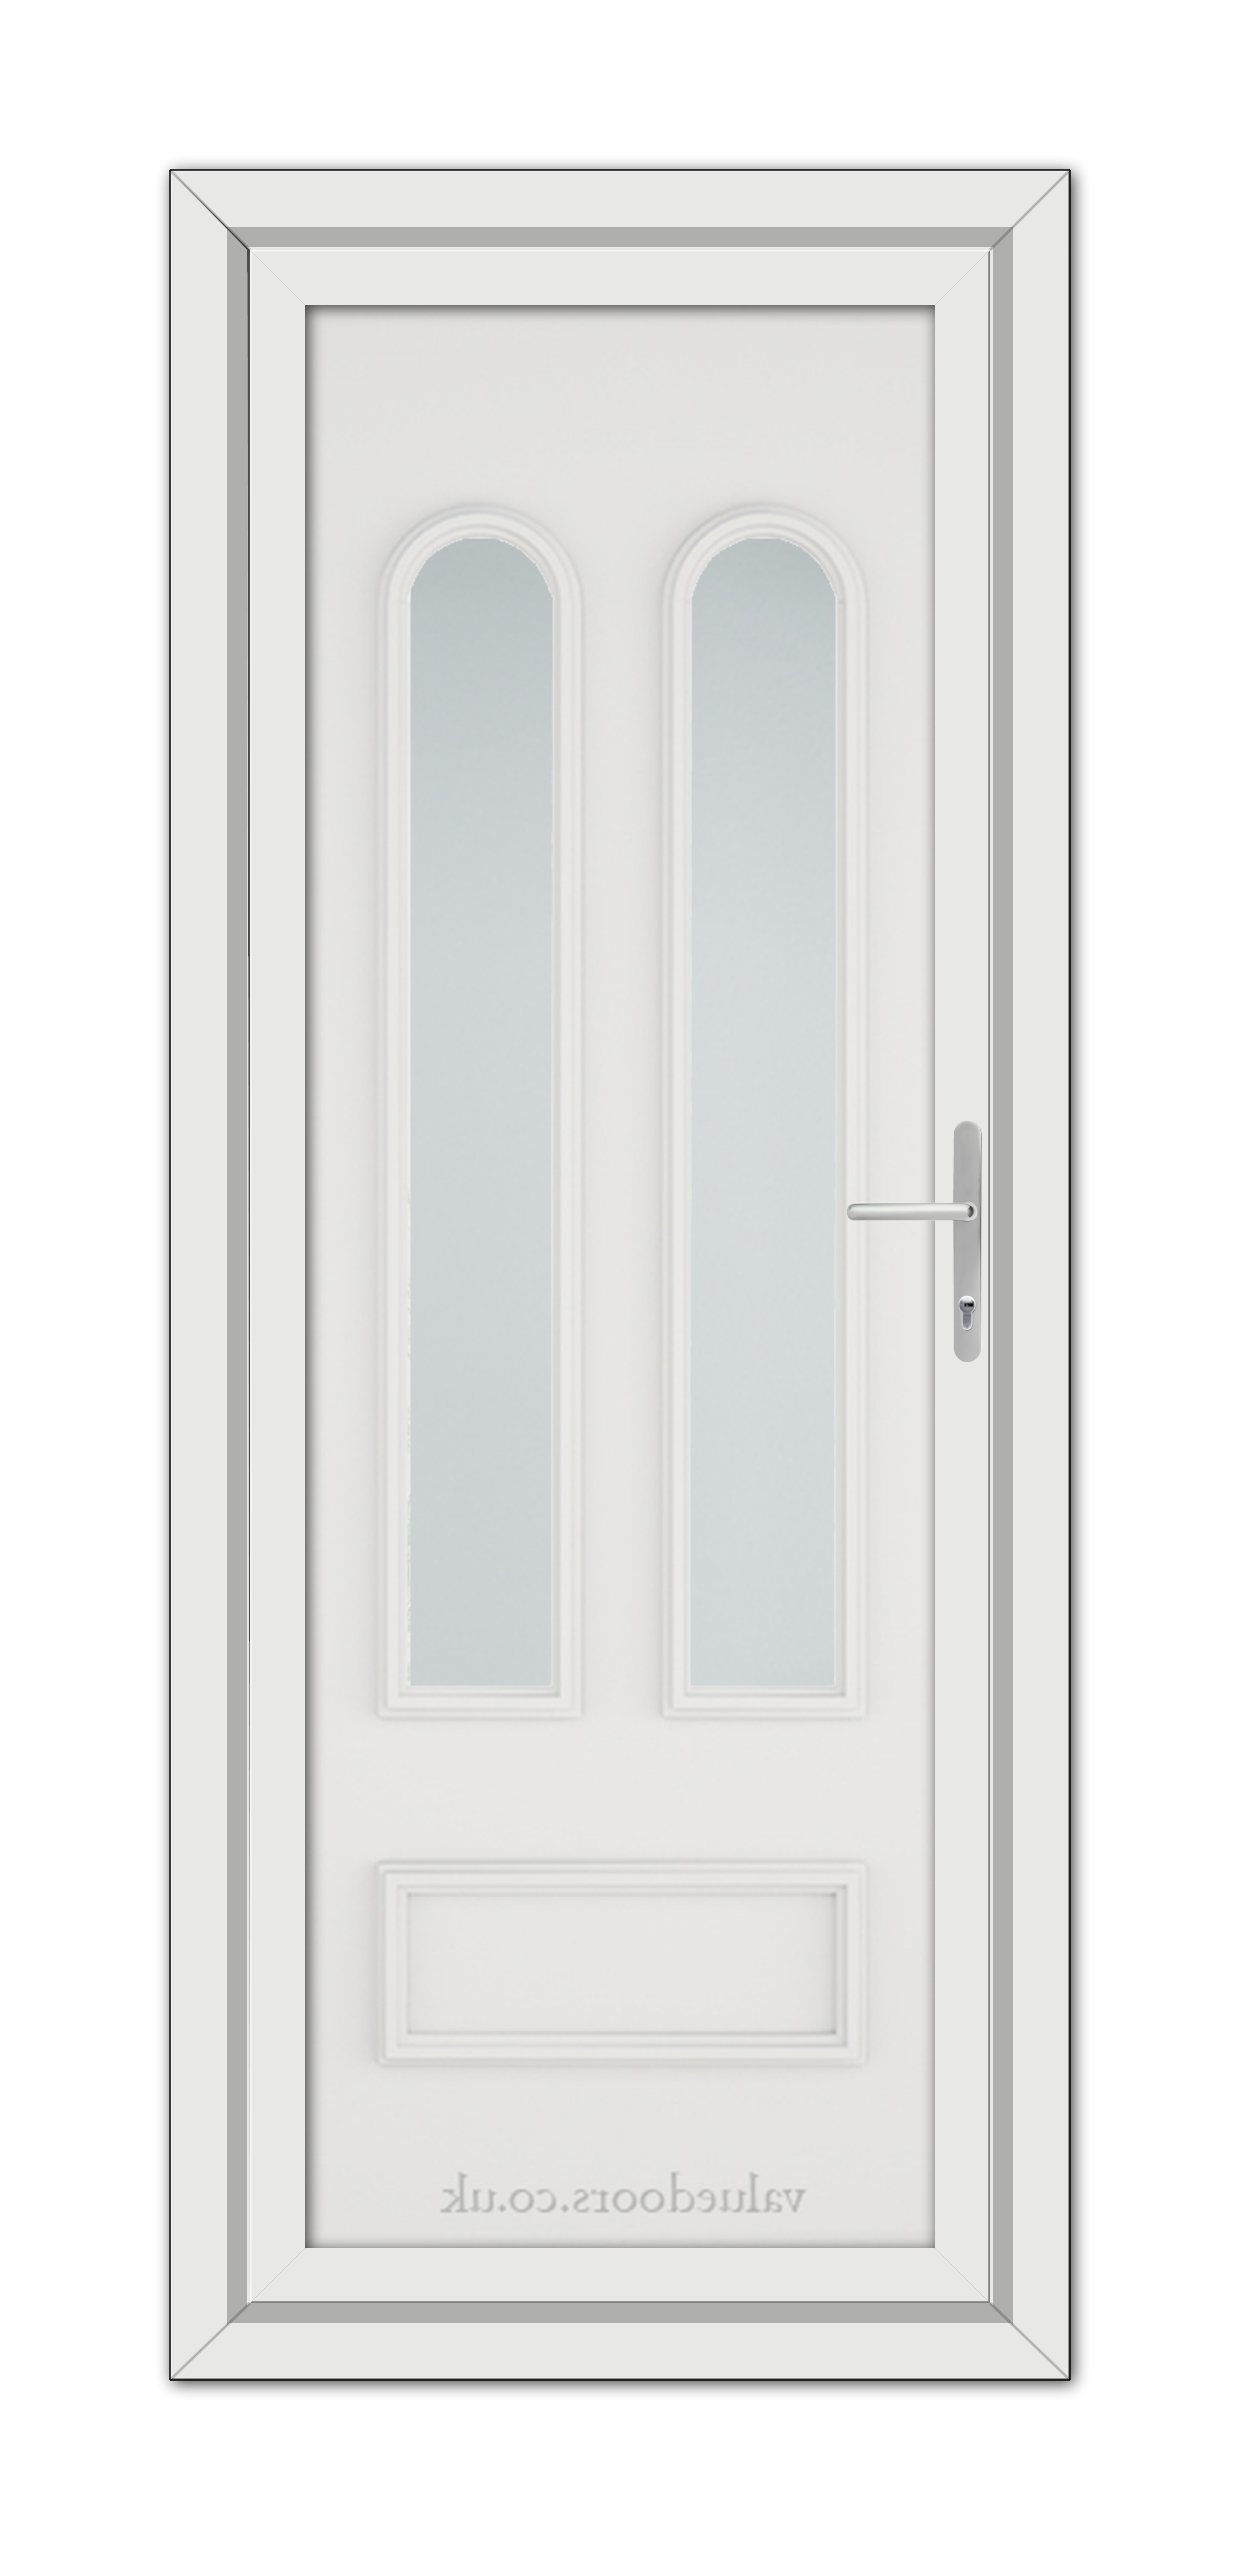 A White Madrid uPVC Door featuring a vertical, double-panel glass window at the top and a solid lower panel, equipped with a sleek handle.